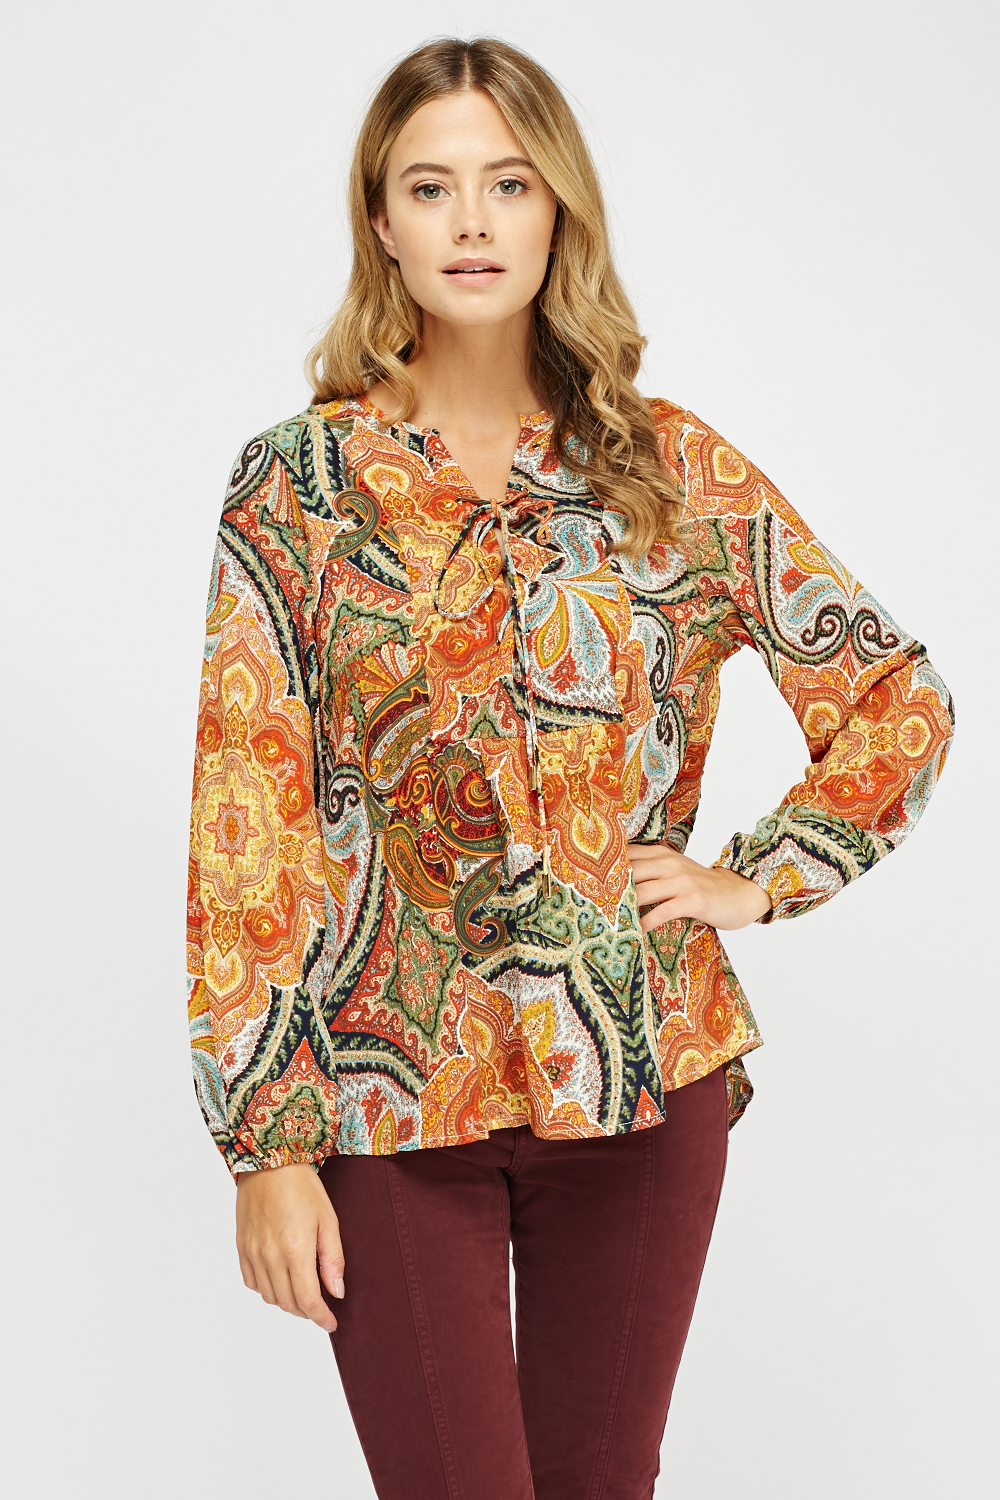 Lace Up Paisley Print Top - Just $7